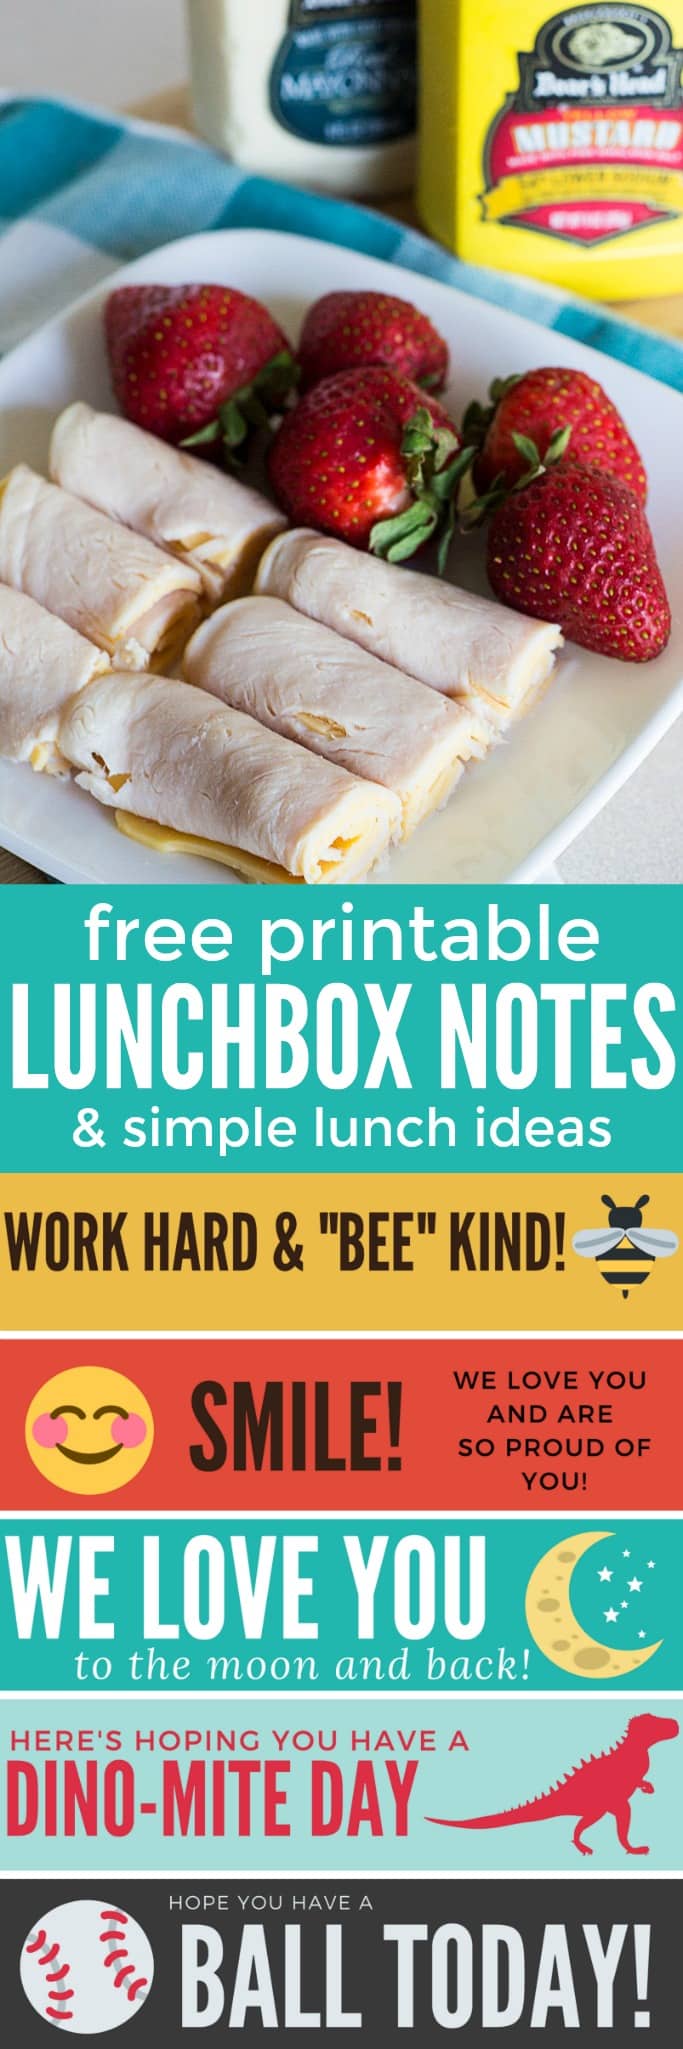 Busy parents can pack lunches easier with our printable lunchbox notes and simple lunch ideas using Boar's Head products. #ad #BacktoSchoolwithBoarsHead